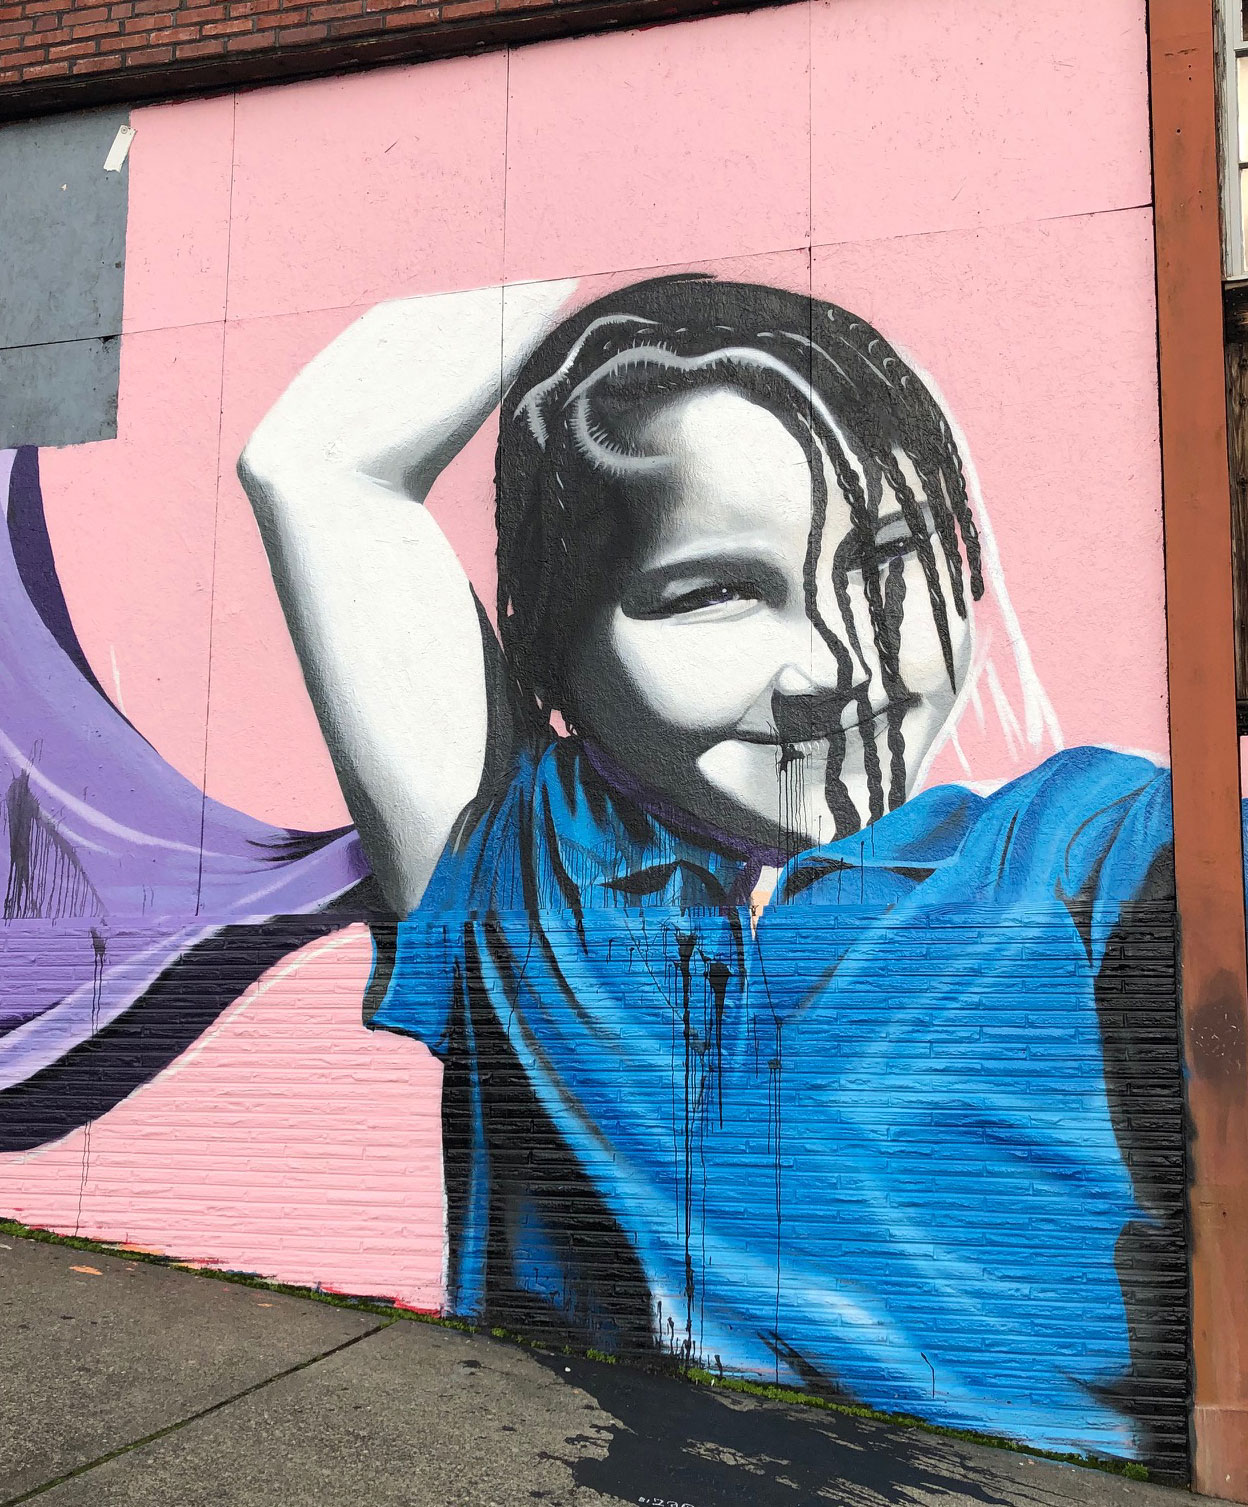 Art is found all over Tacoma.Photo: Morf Morford